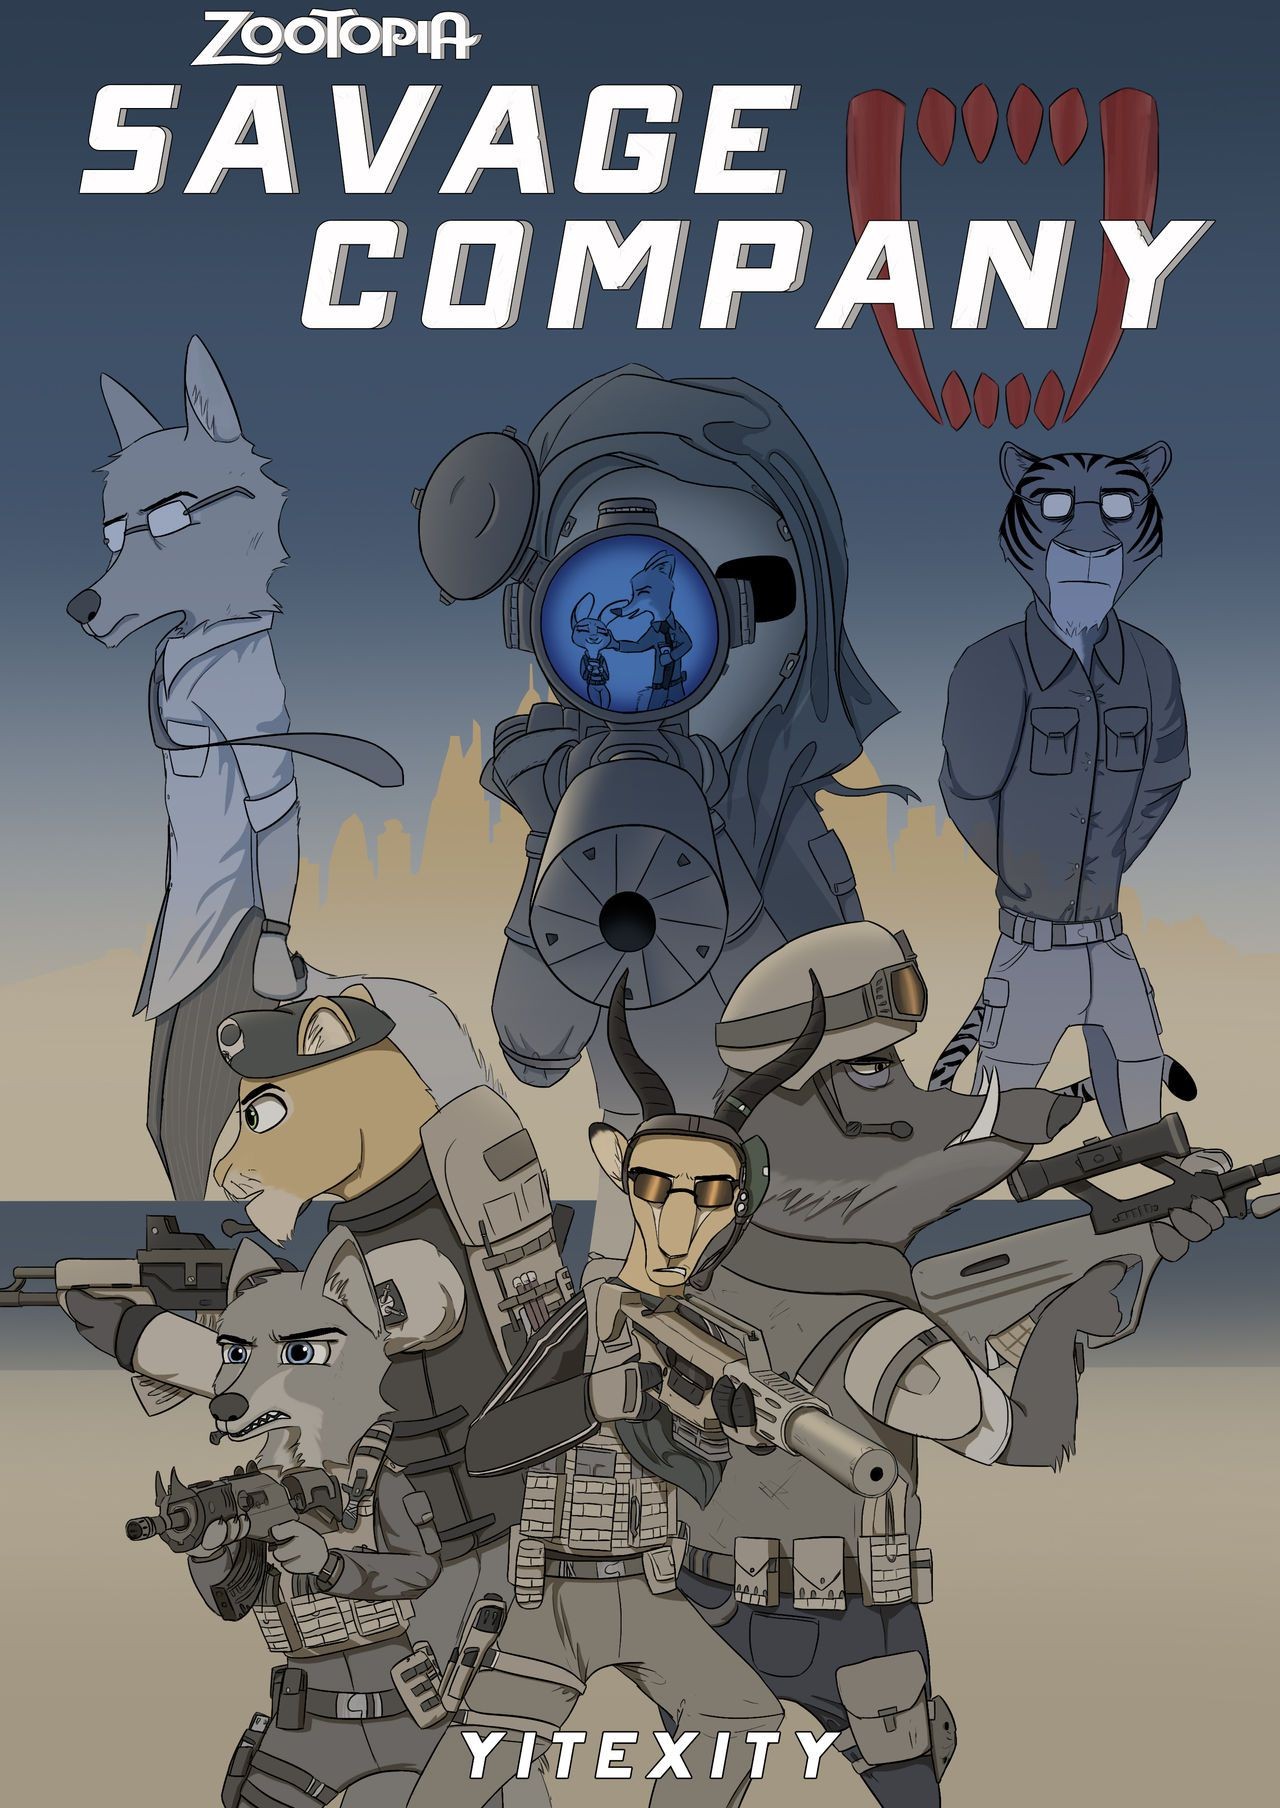 Free Hardcore [Yitexity] Savage Company - Chapter 2 (Zootopia) [Ongoing] Sex Party